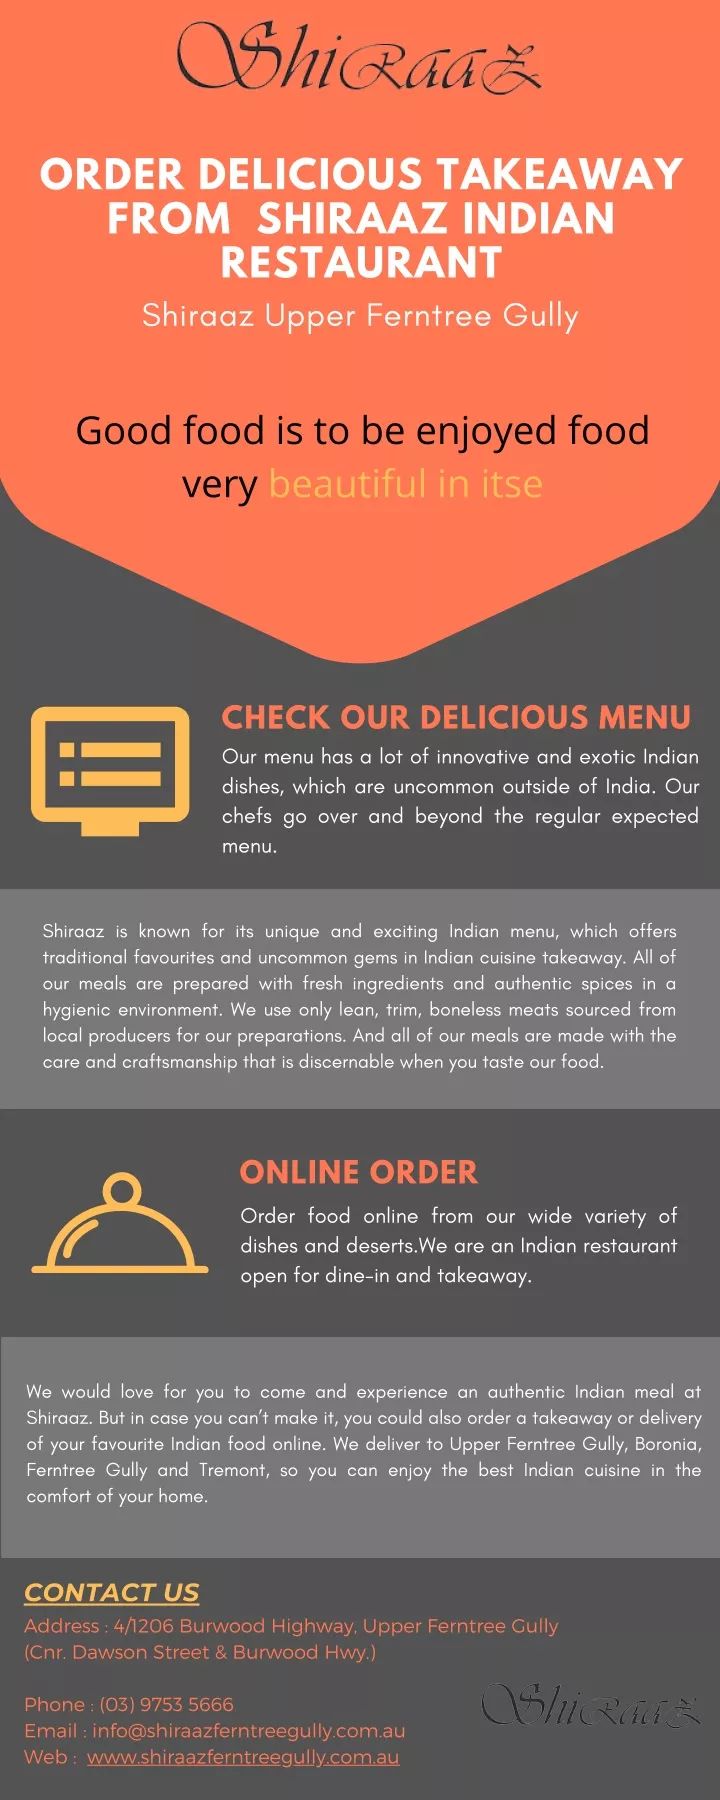 order delicious takeaway from shiraaz indian